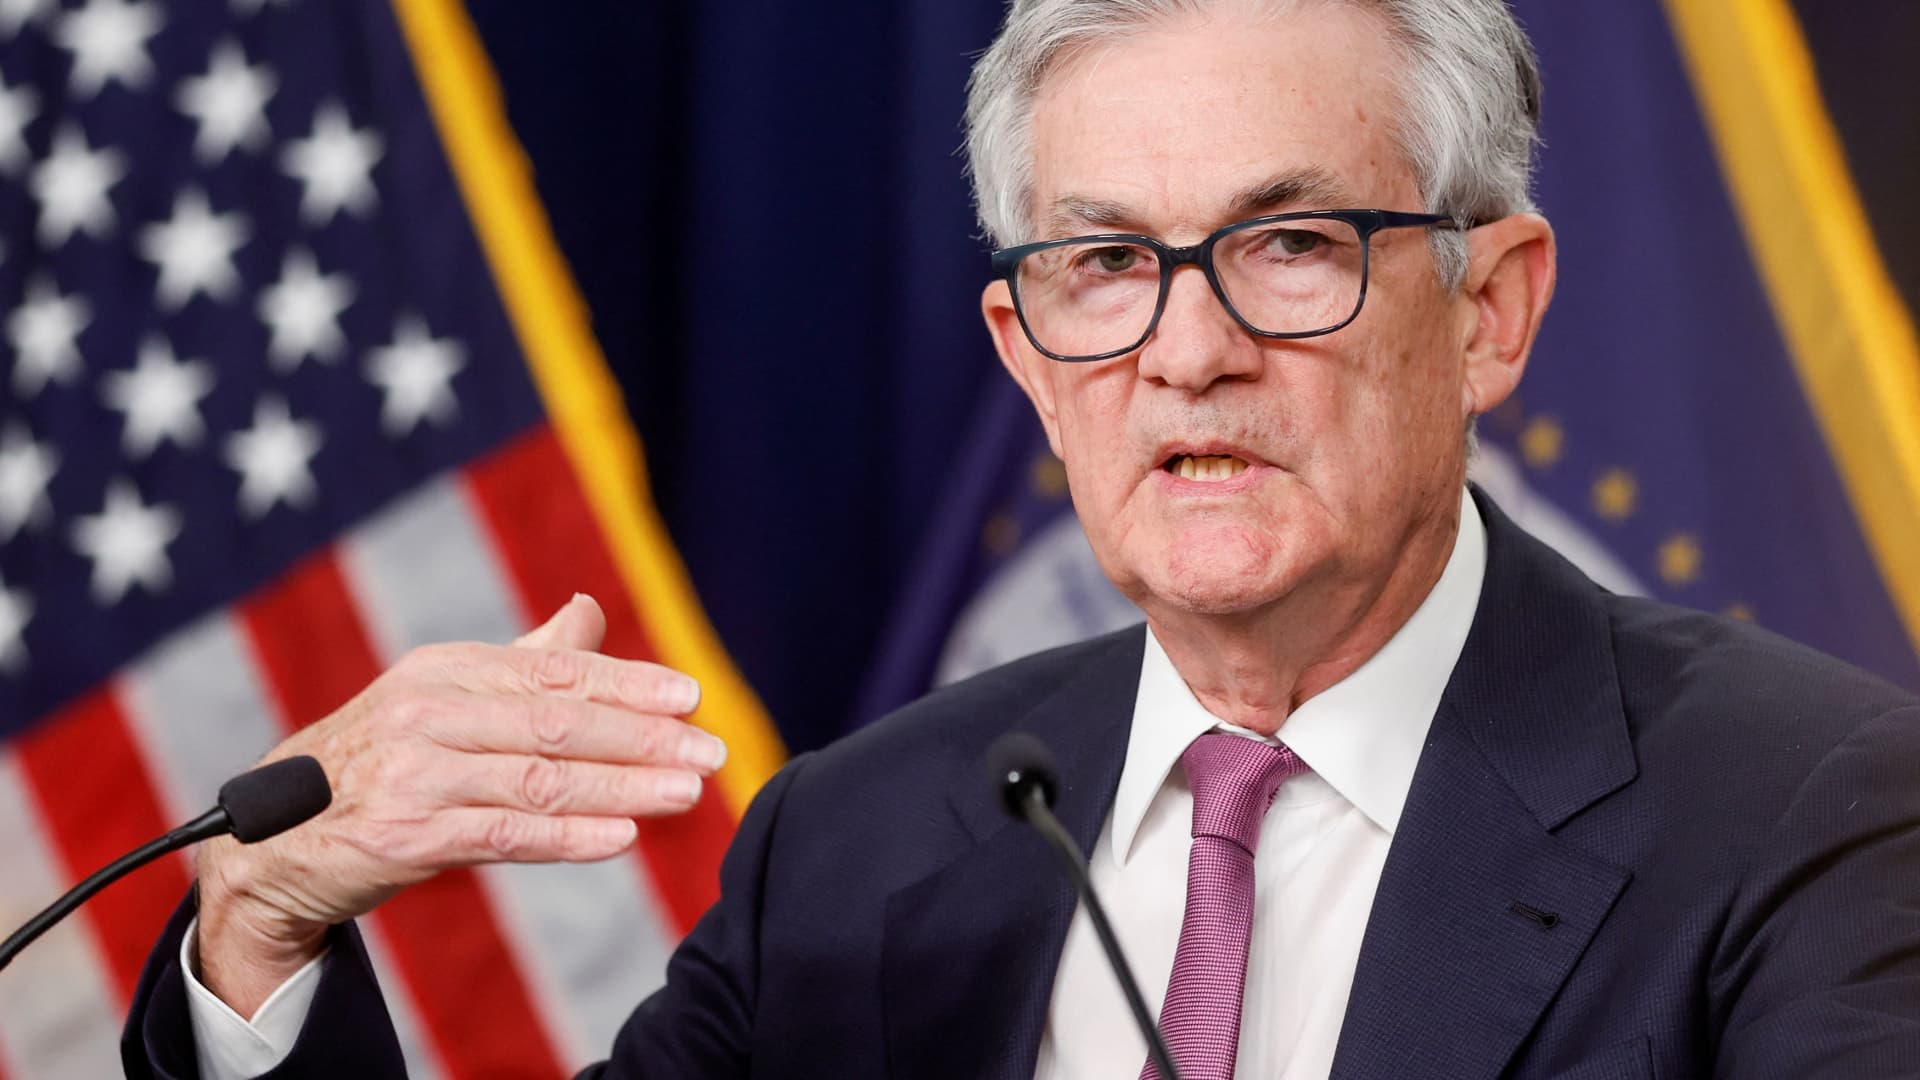 Fed poised to approve quarter-point rate hike this week, despite